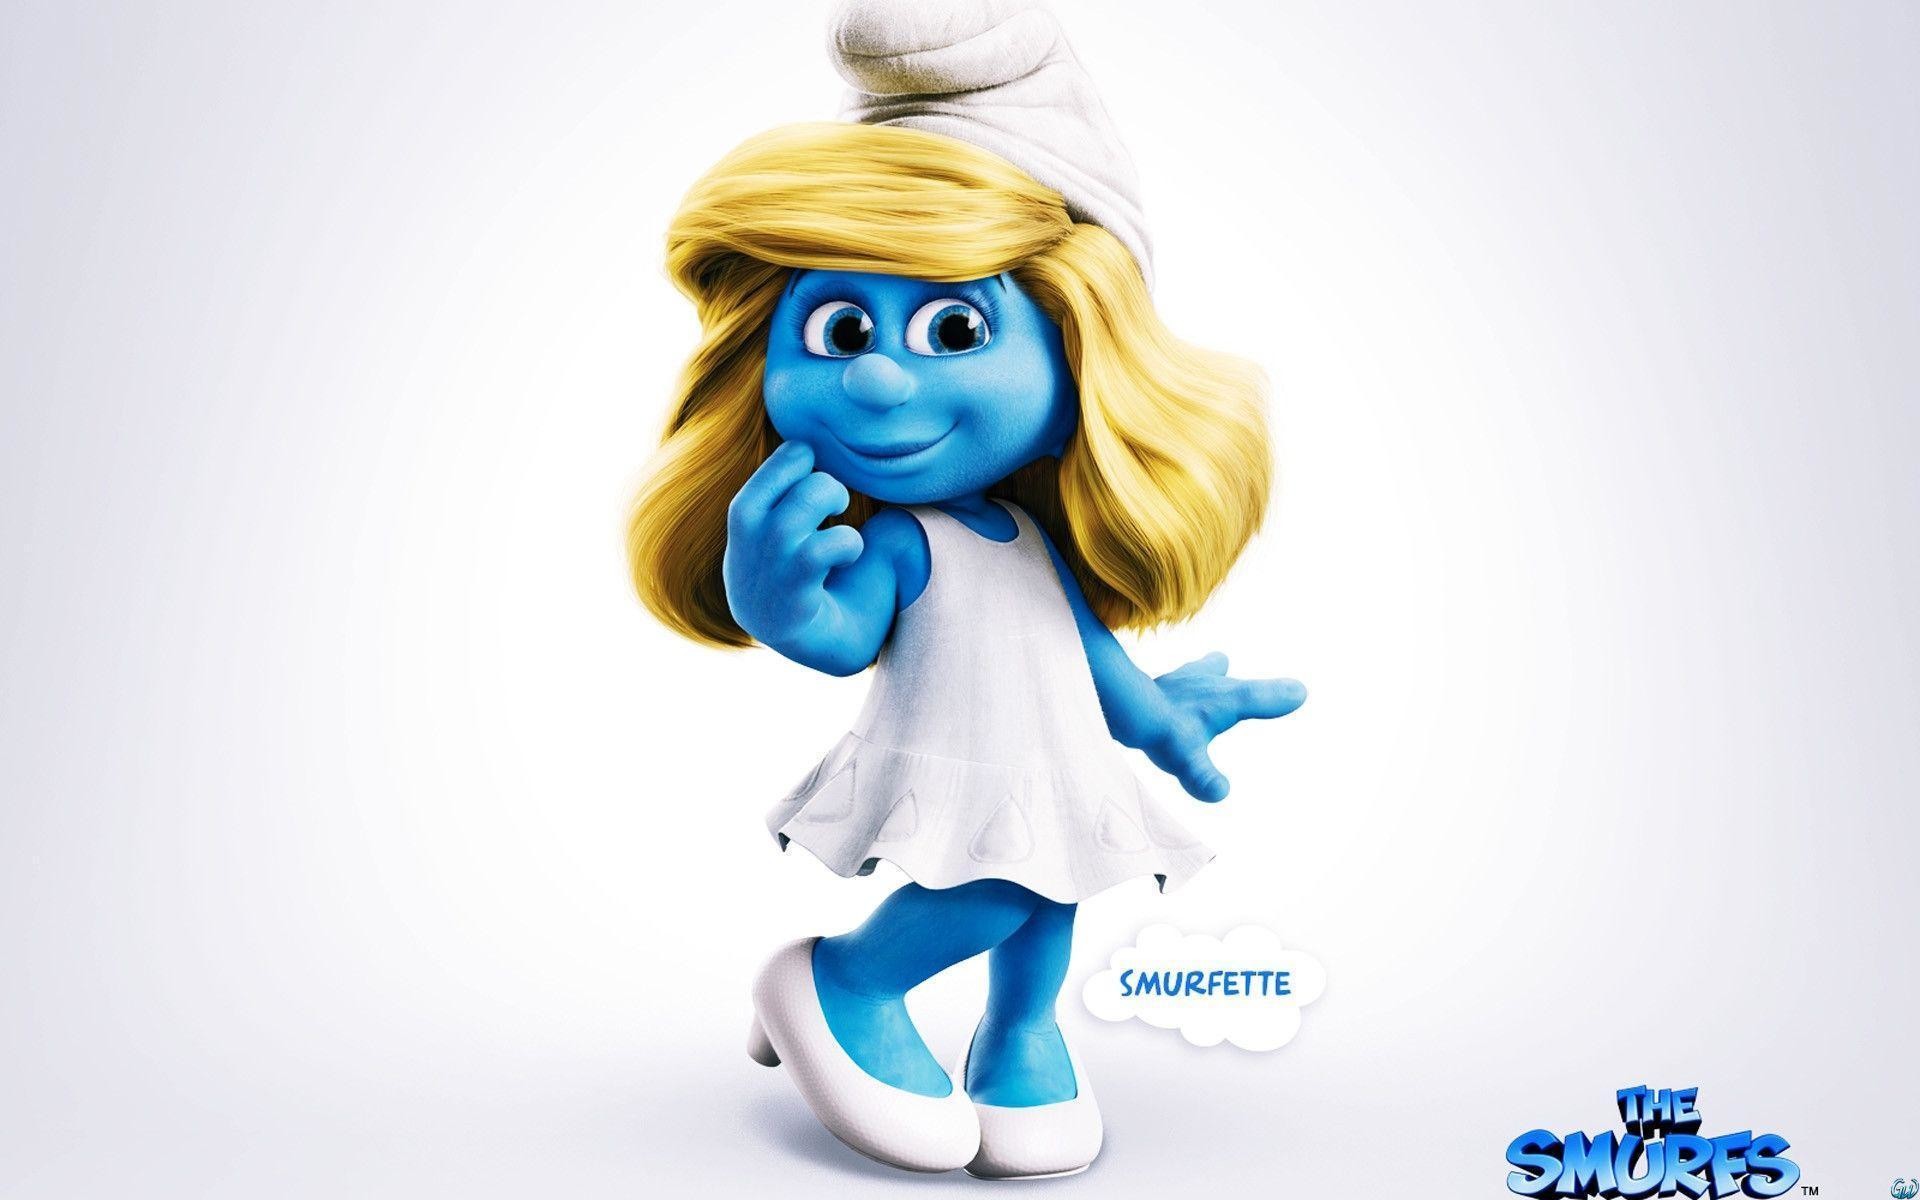 1920x1200 Smurfs Wallpapers - Full HD wallpaper search - page 2